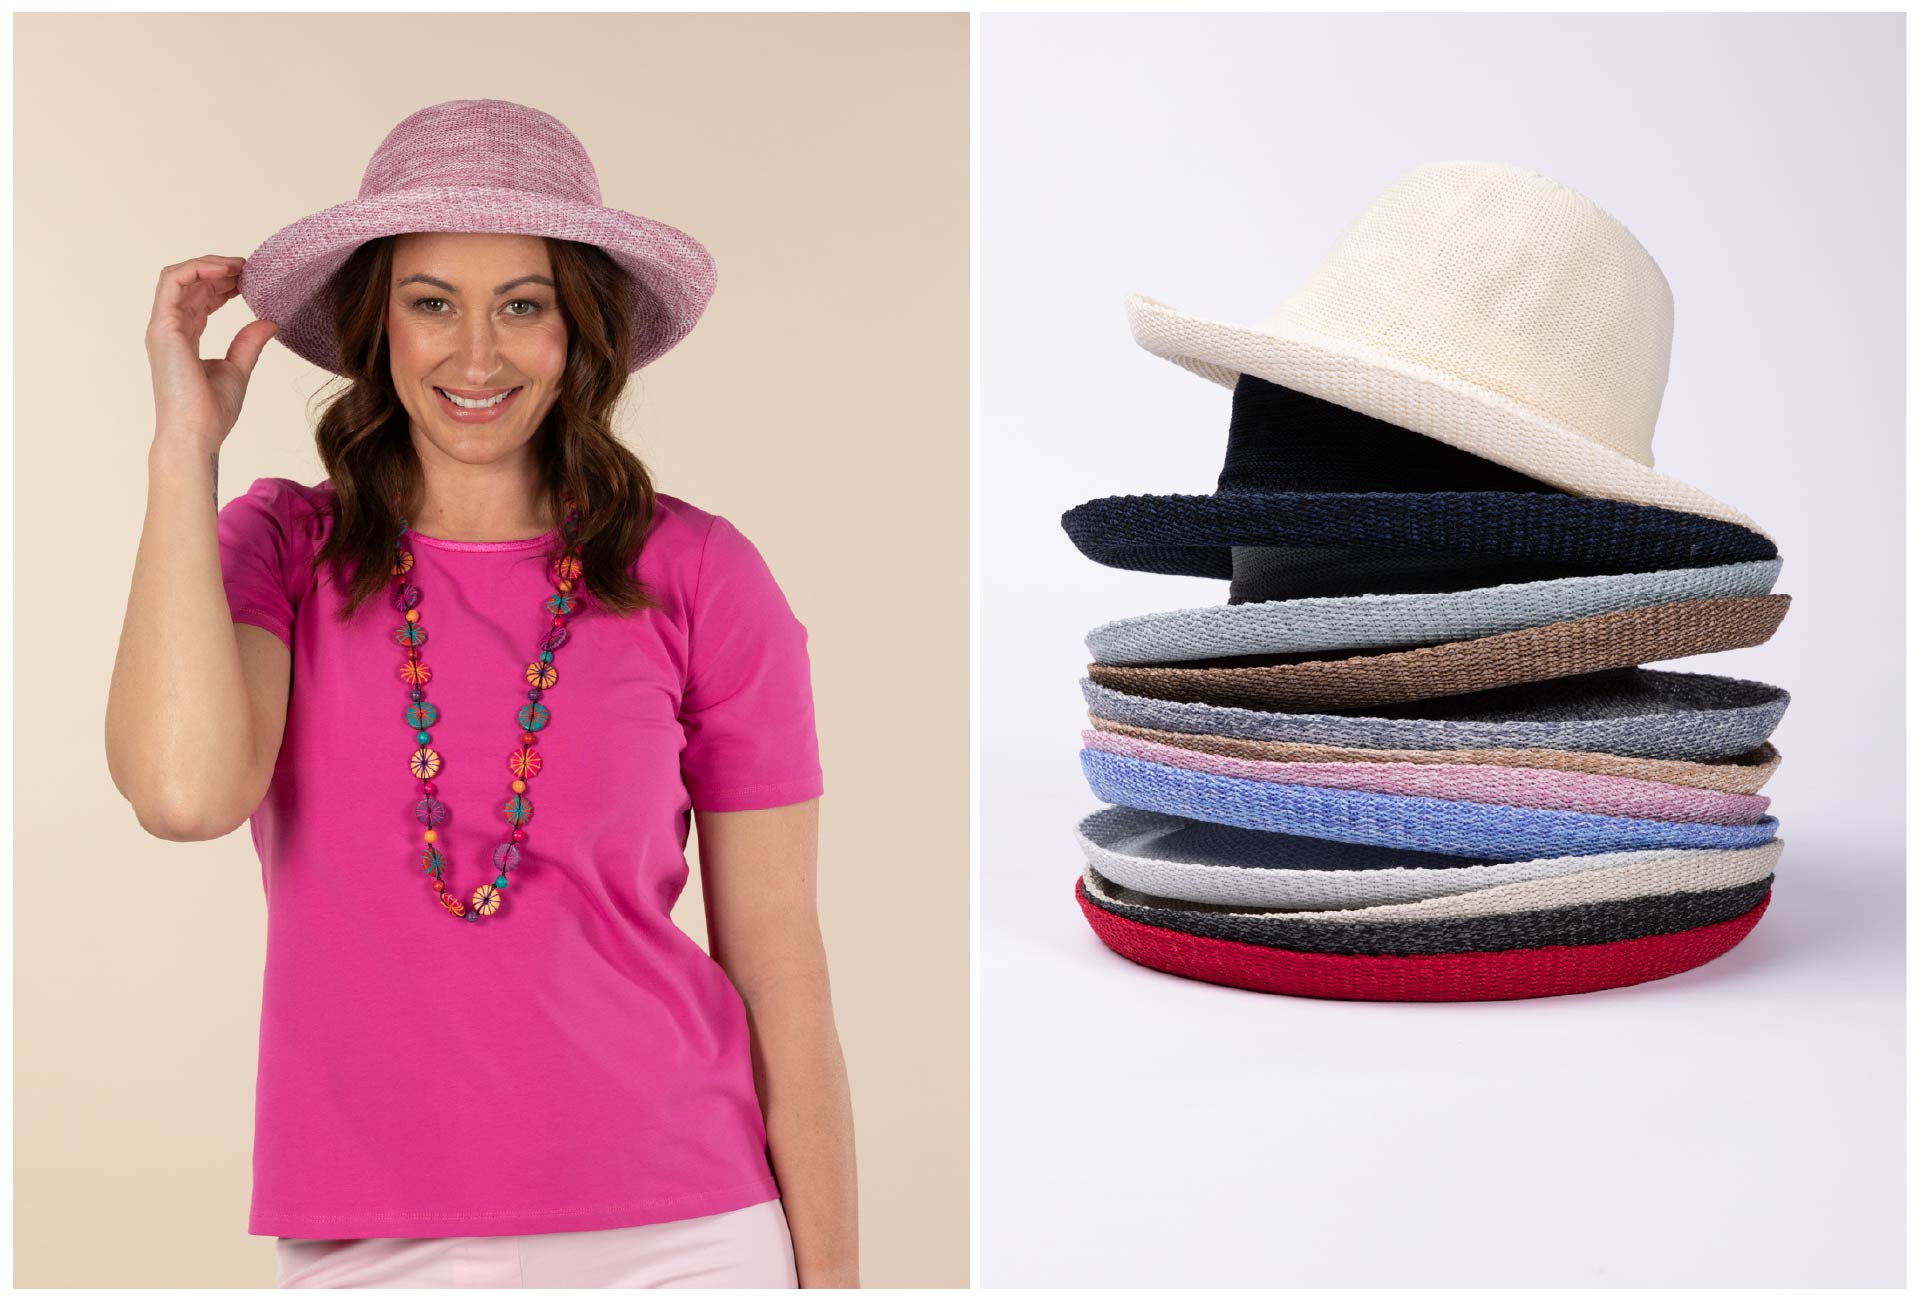 Sunhats in 13 colours such as pink, blue, red, black and navy blue